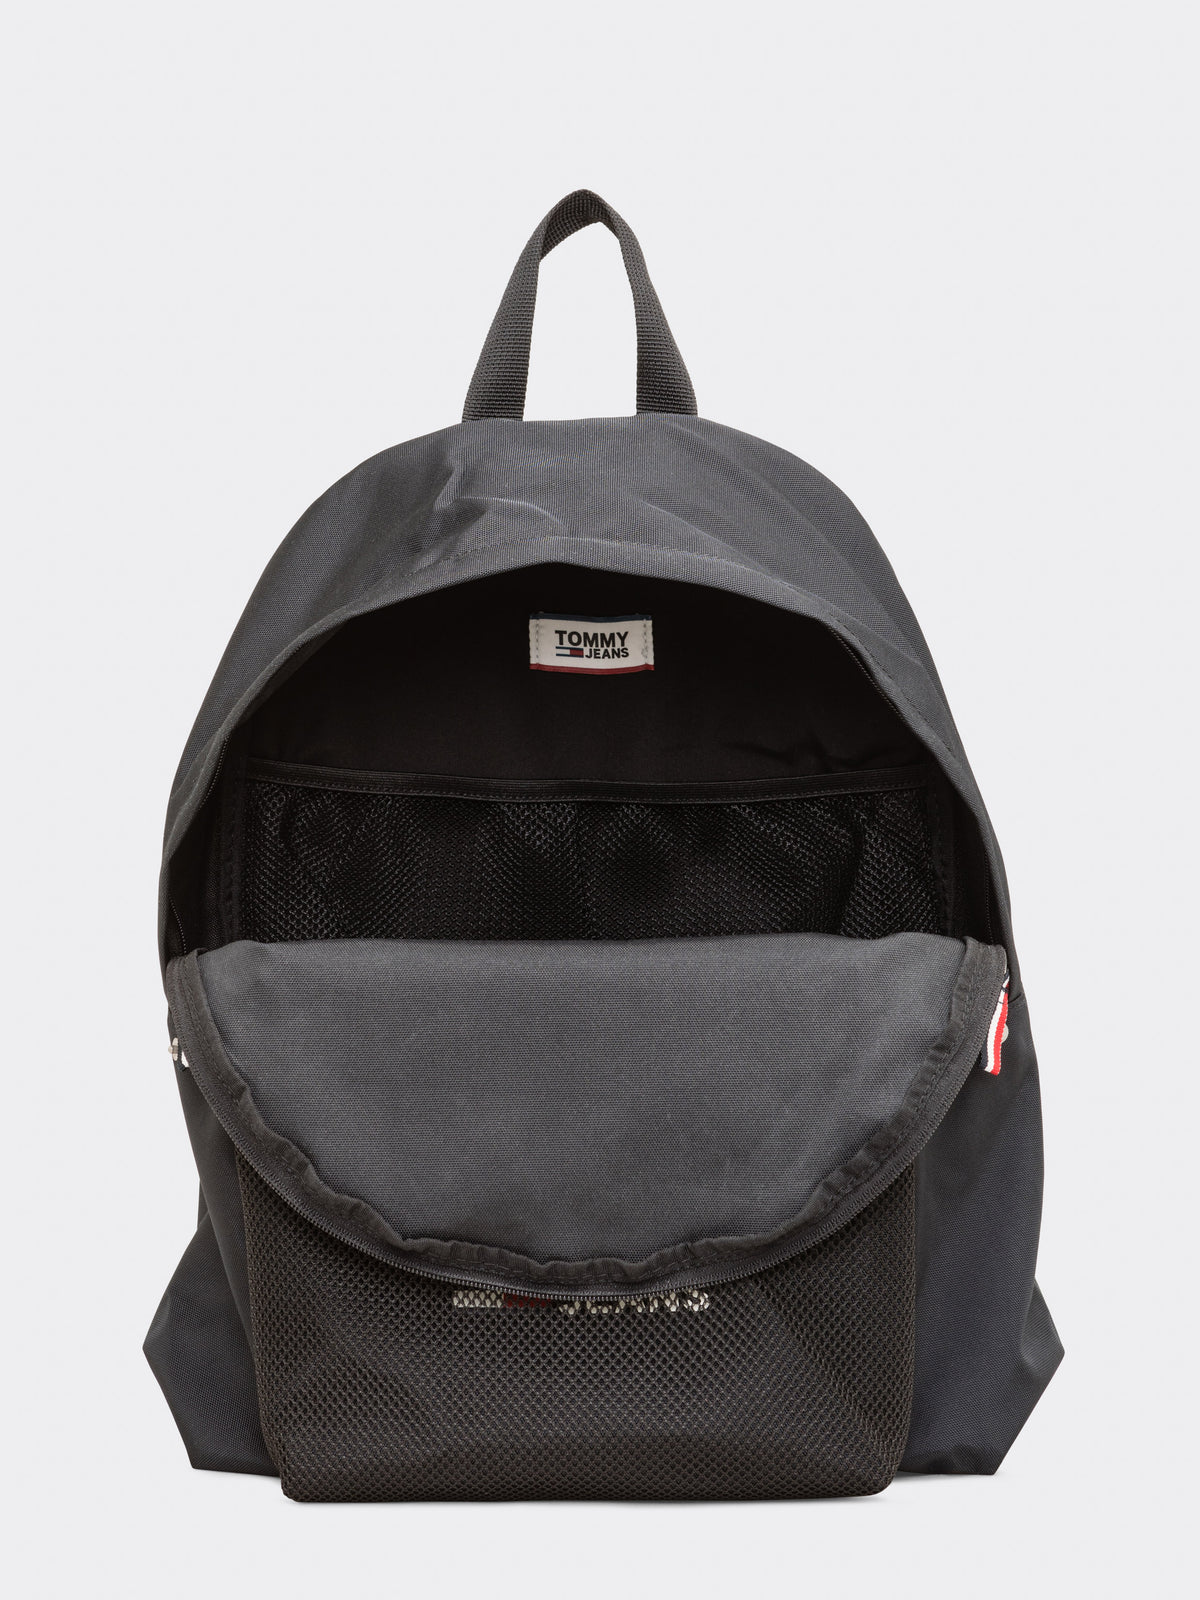 Cool City Backpack in Black